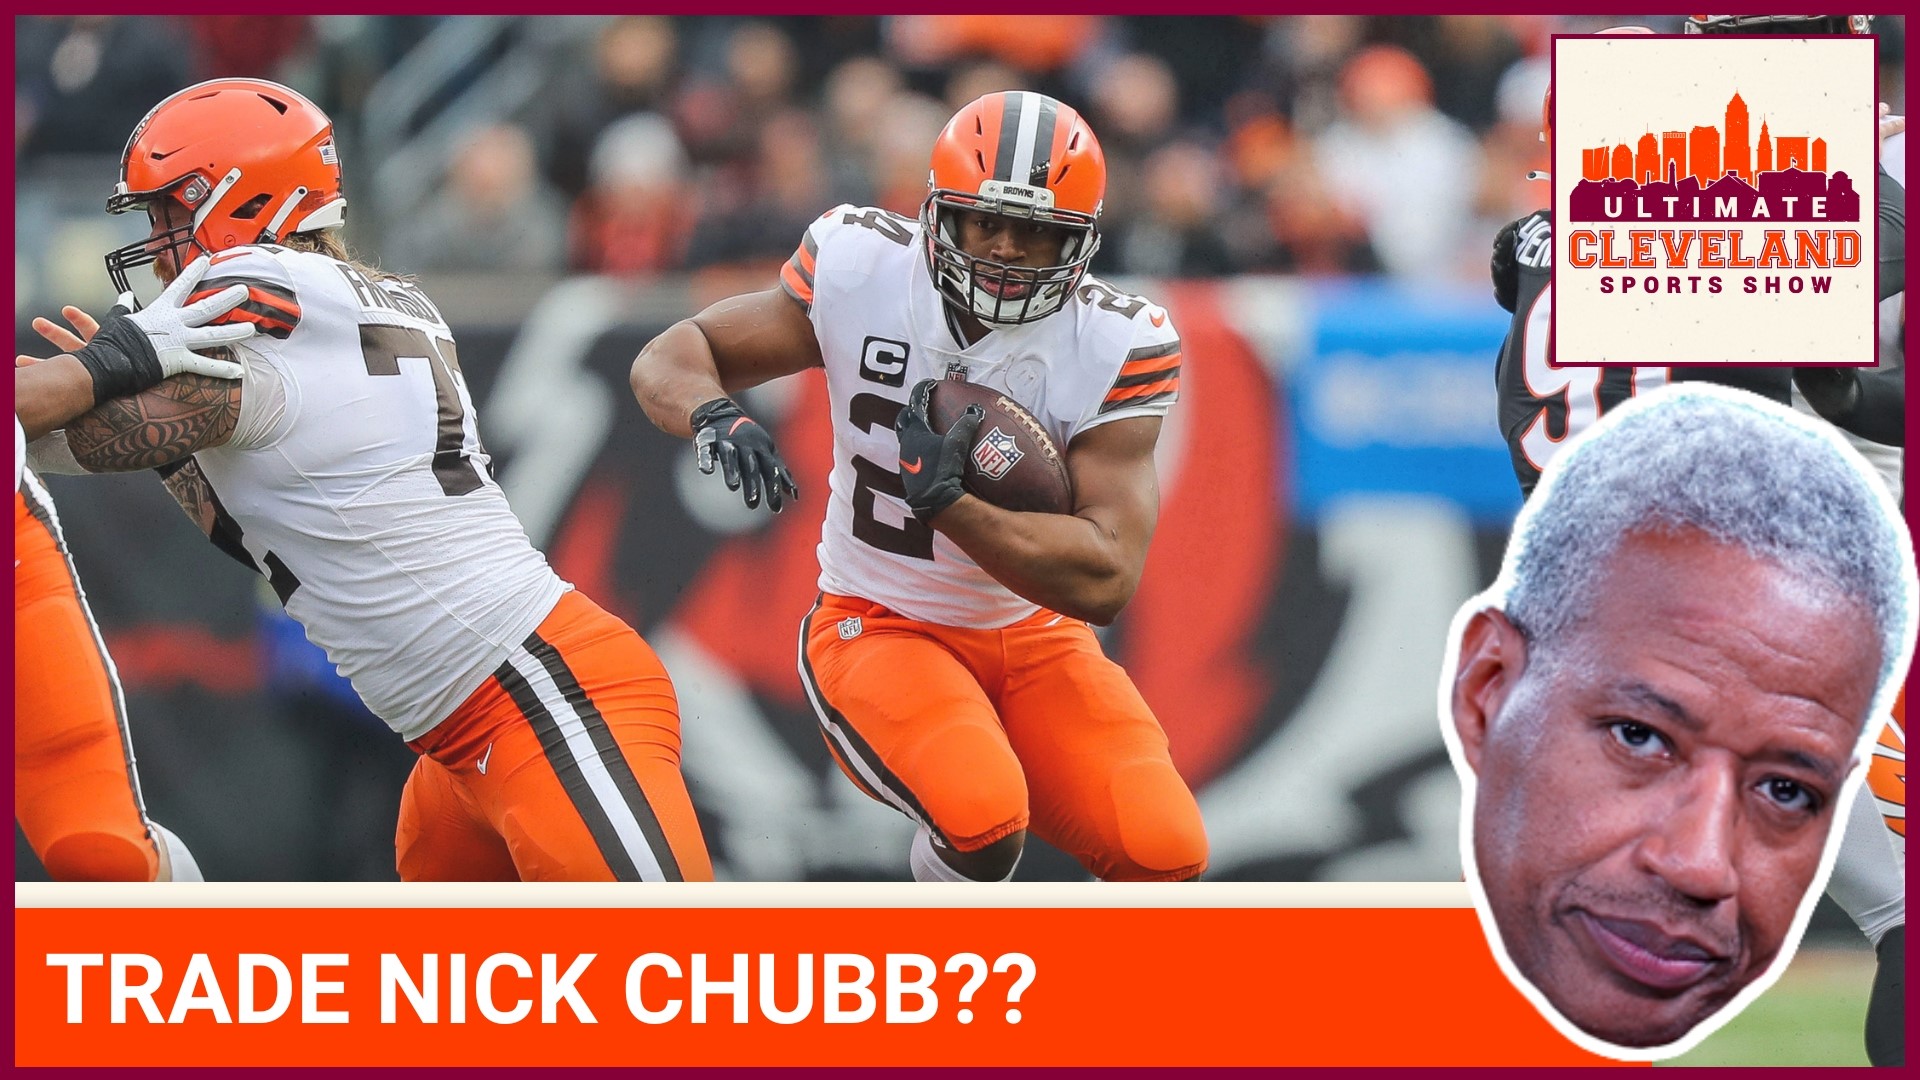 This year, it's whether or not the team should trade star running back Nick Chubb, who is coming off a career year.